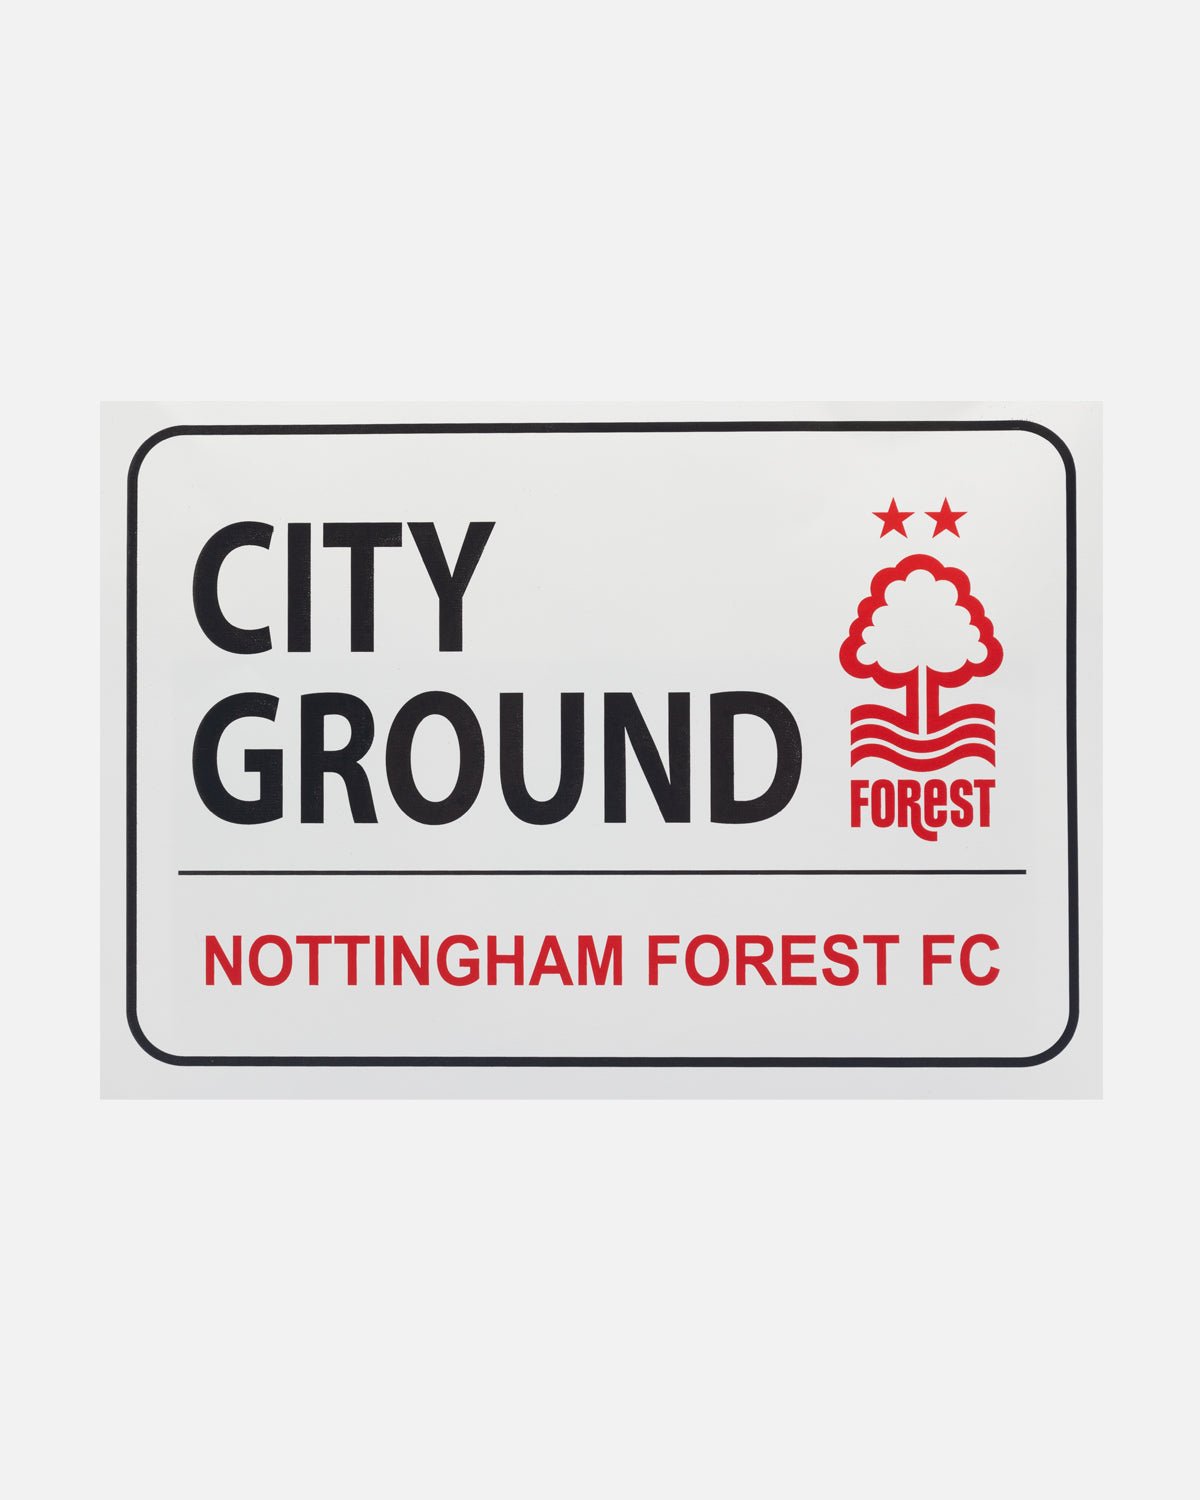 NFFC A5 Street Sign Decal - Nottingham Forest FC